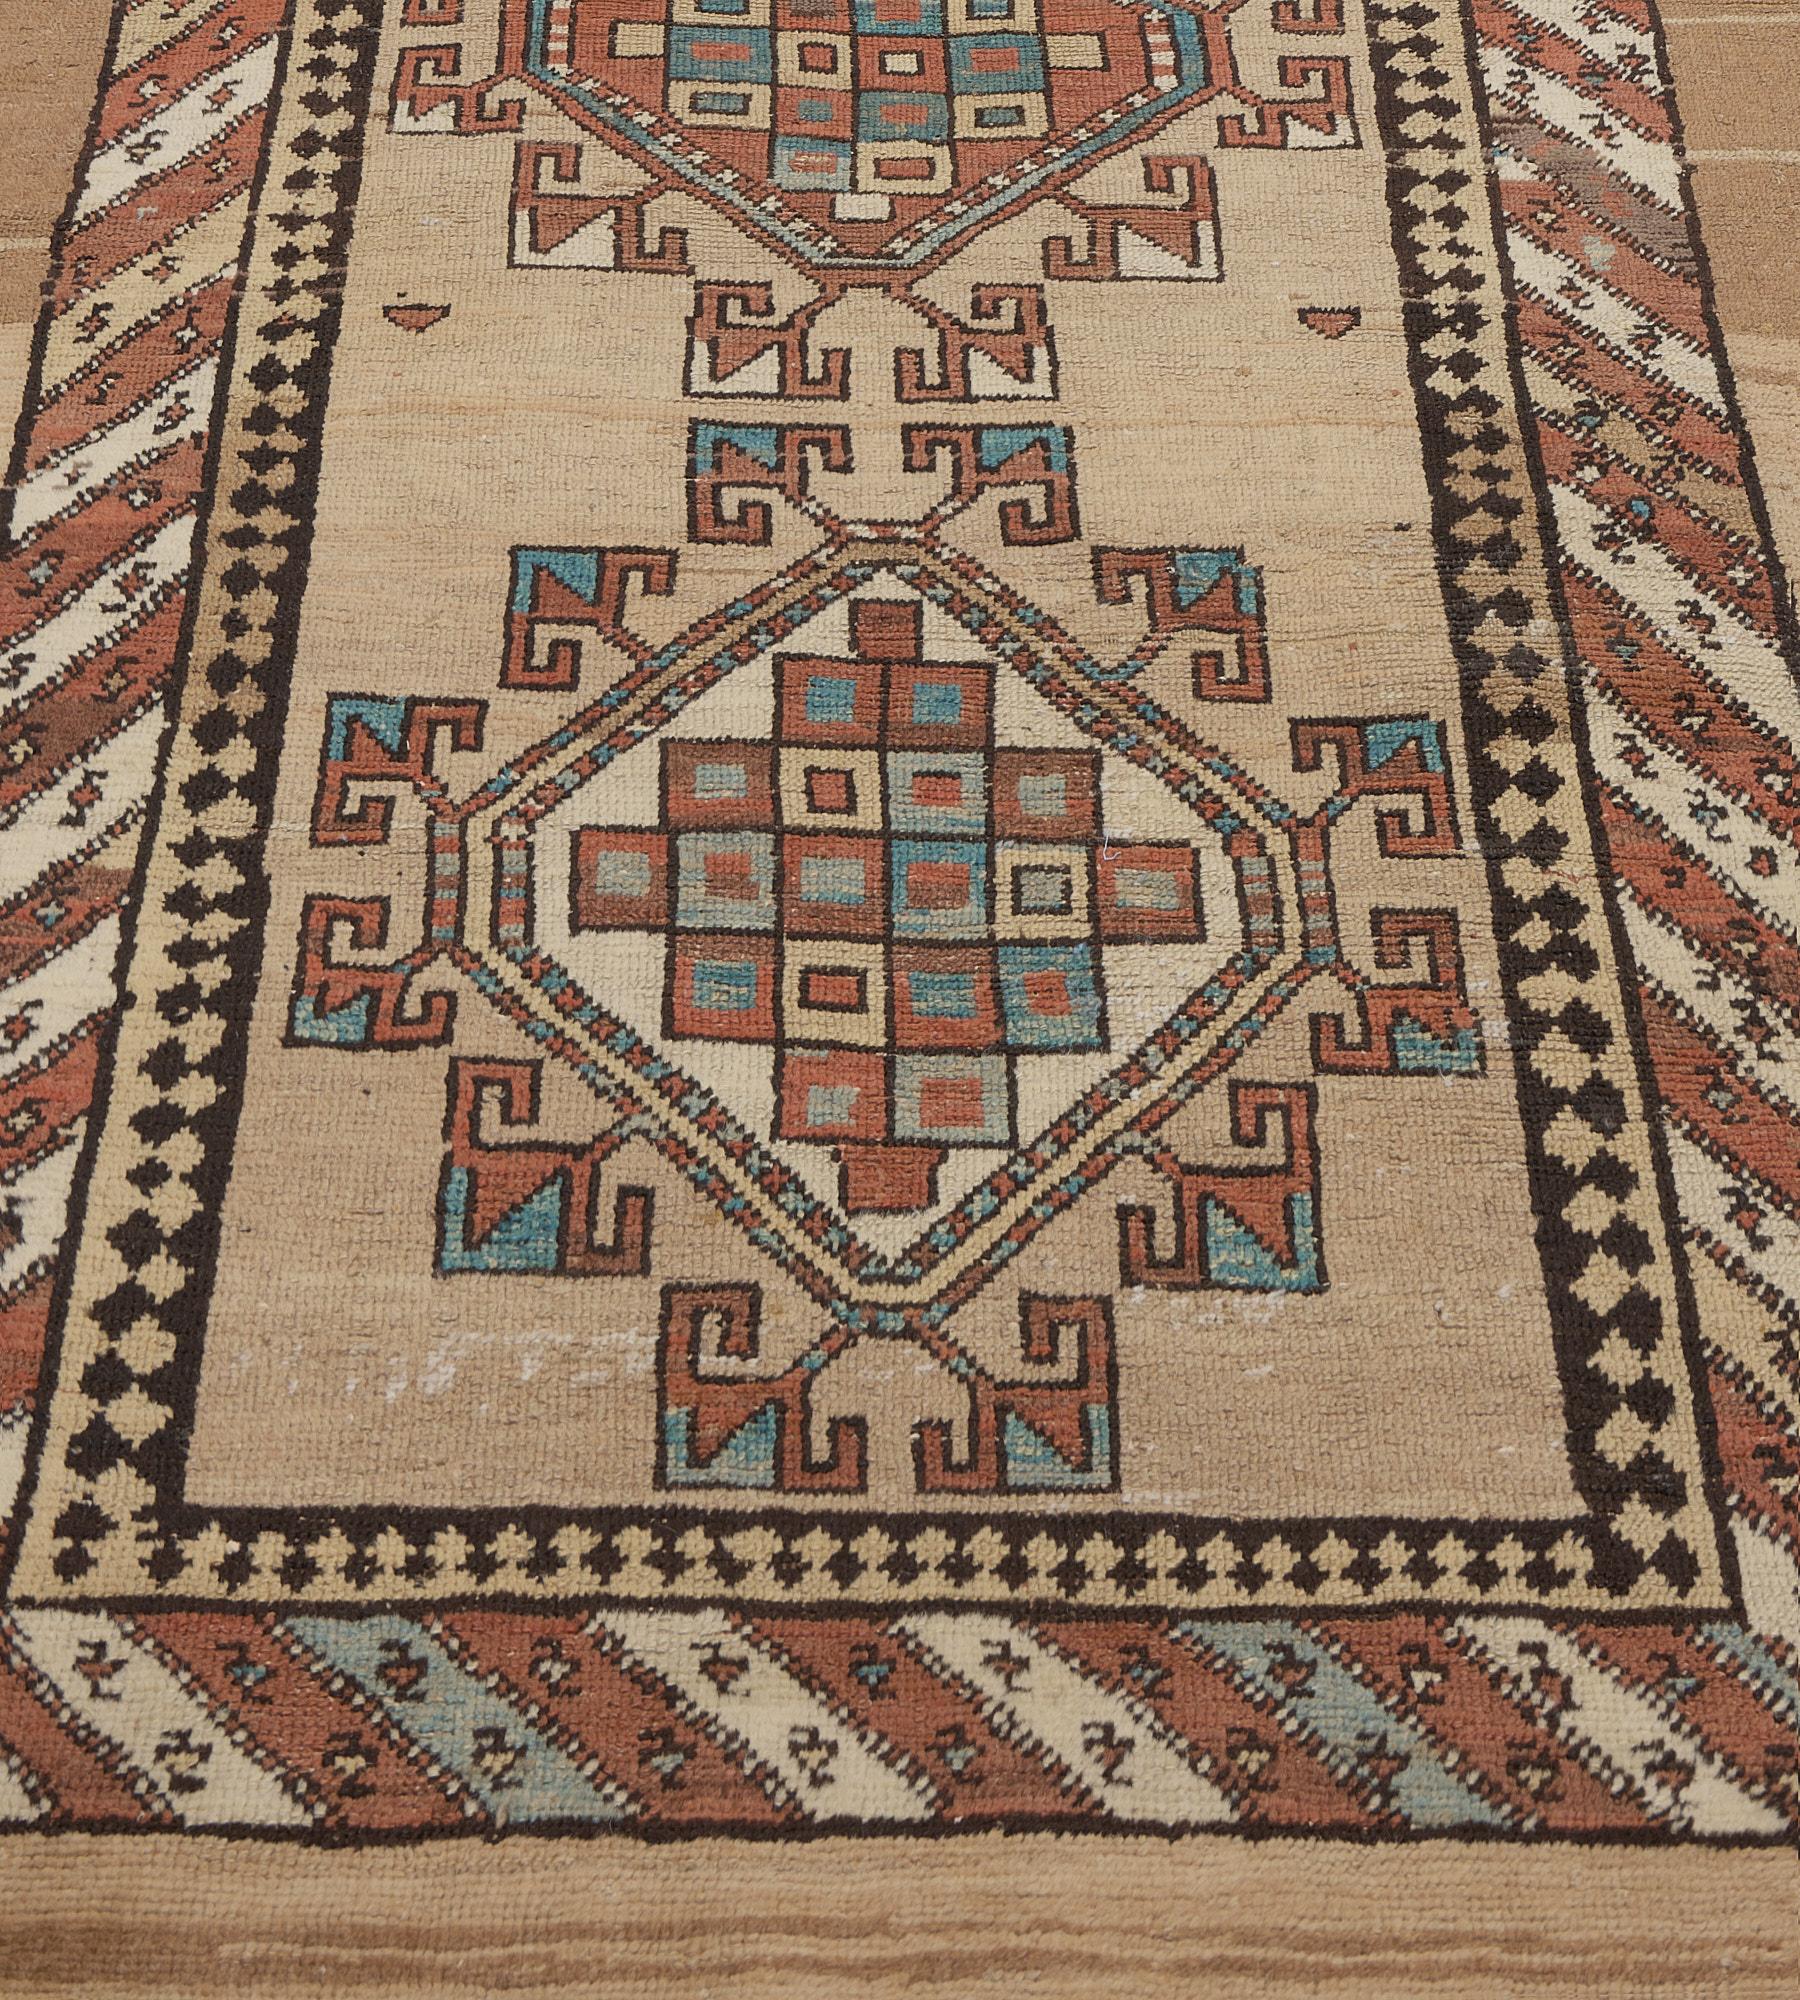 This antique, circa 1900, Serab runner has a sandy-brown field with a central column of six ivory hooked lozenges each containing stepped linked polychrome square panels, in a border of ivory, light blue and terracotta-red diagonal stripes between